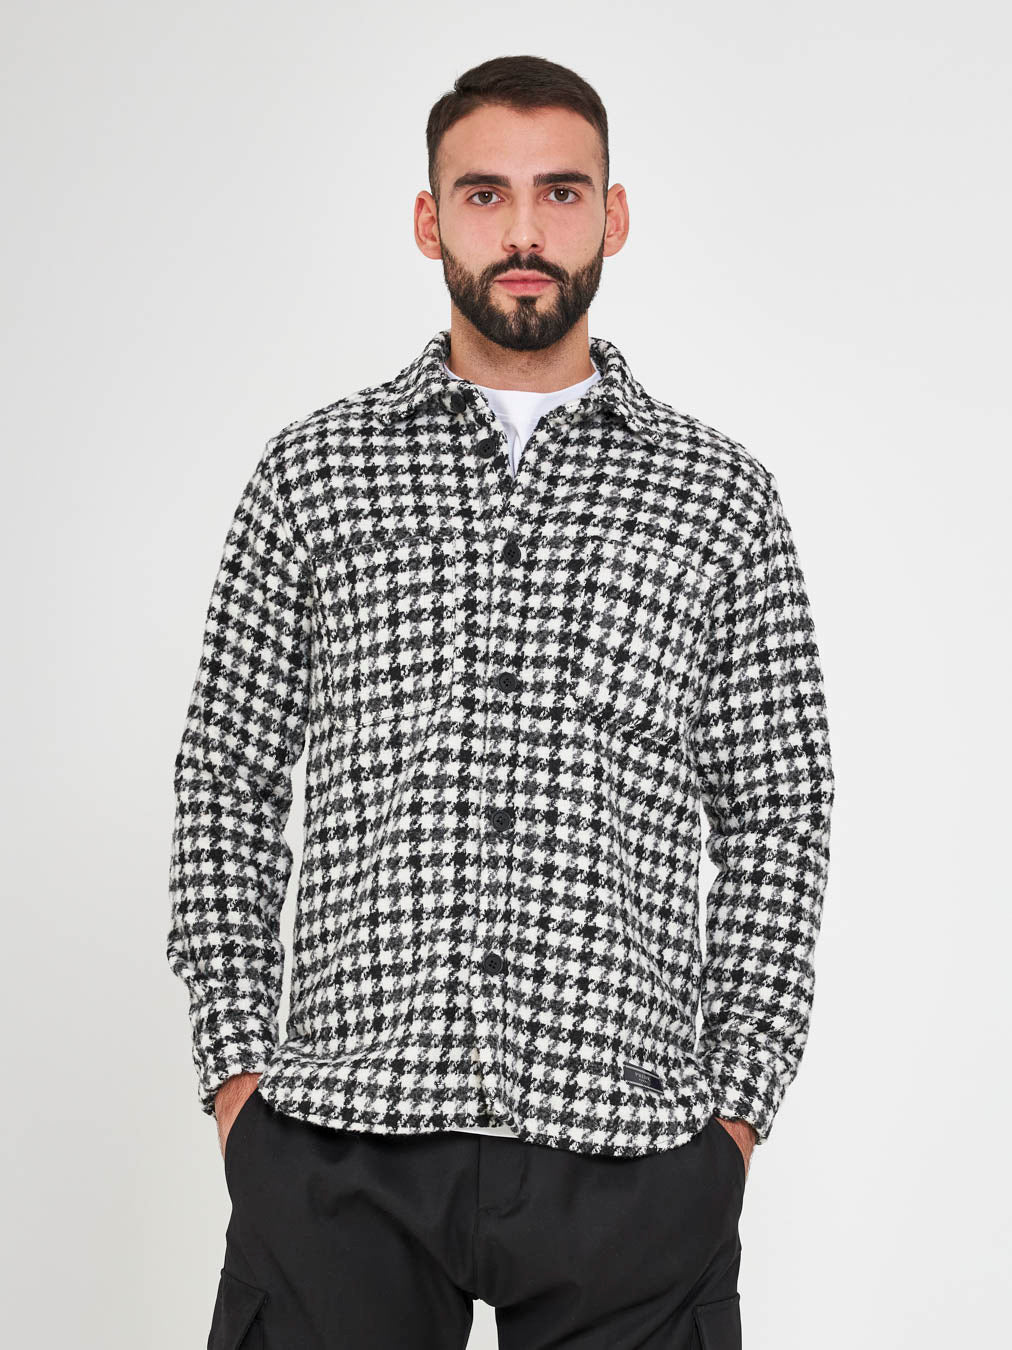 Prime black and white patterned shirt